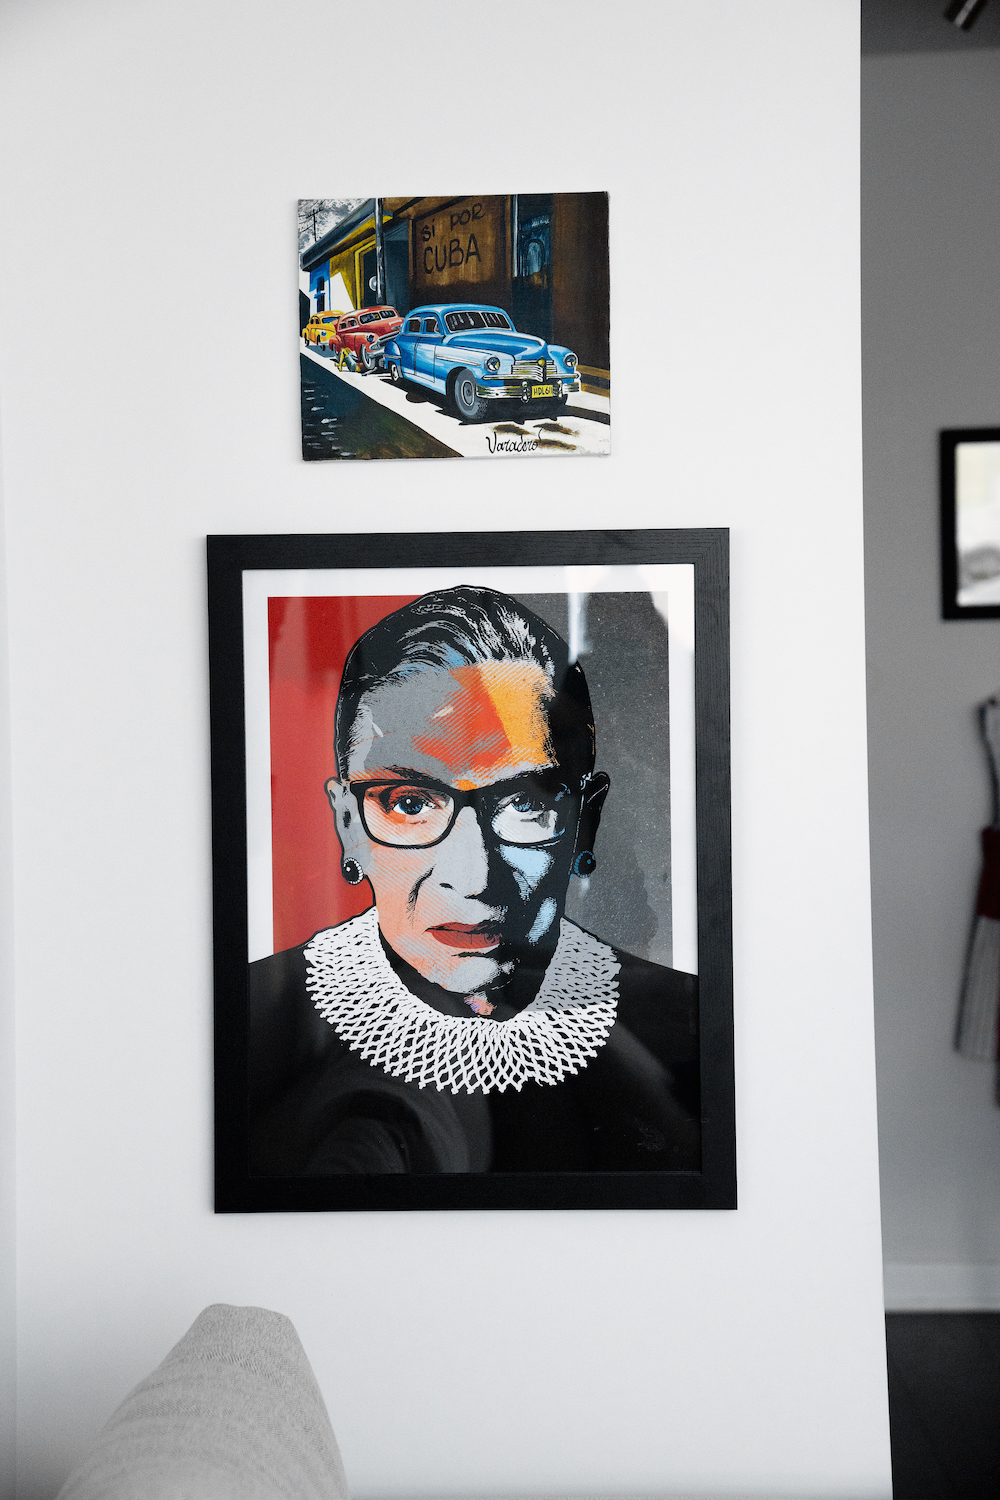 Colourful portrait of the late Justice Ruth Bader Ginsburg hanging on the condo wall